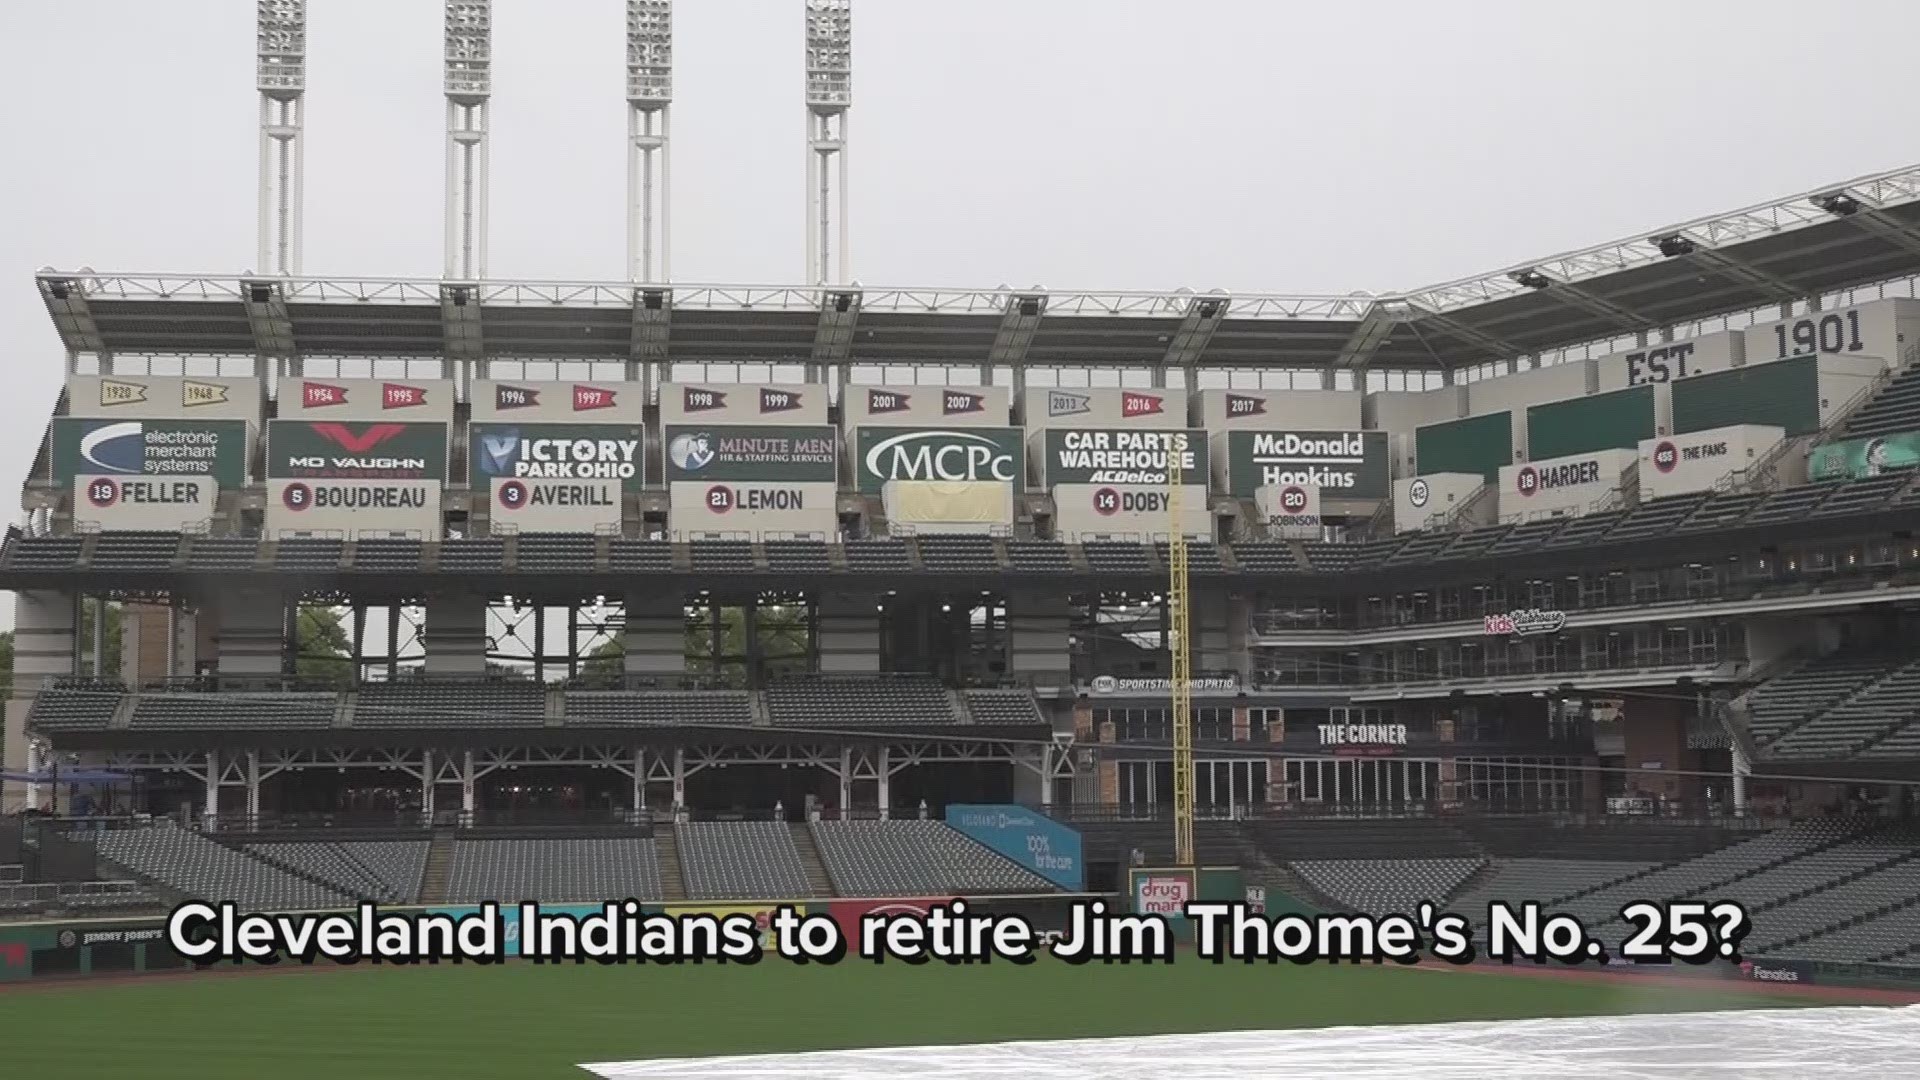 Cleveland Indians to retire Jim Thome's No. 25? New clue points to surprise honor